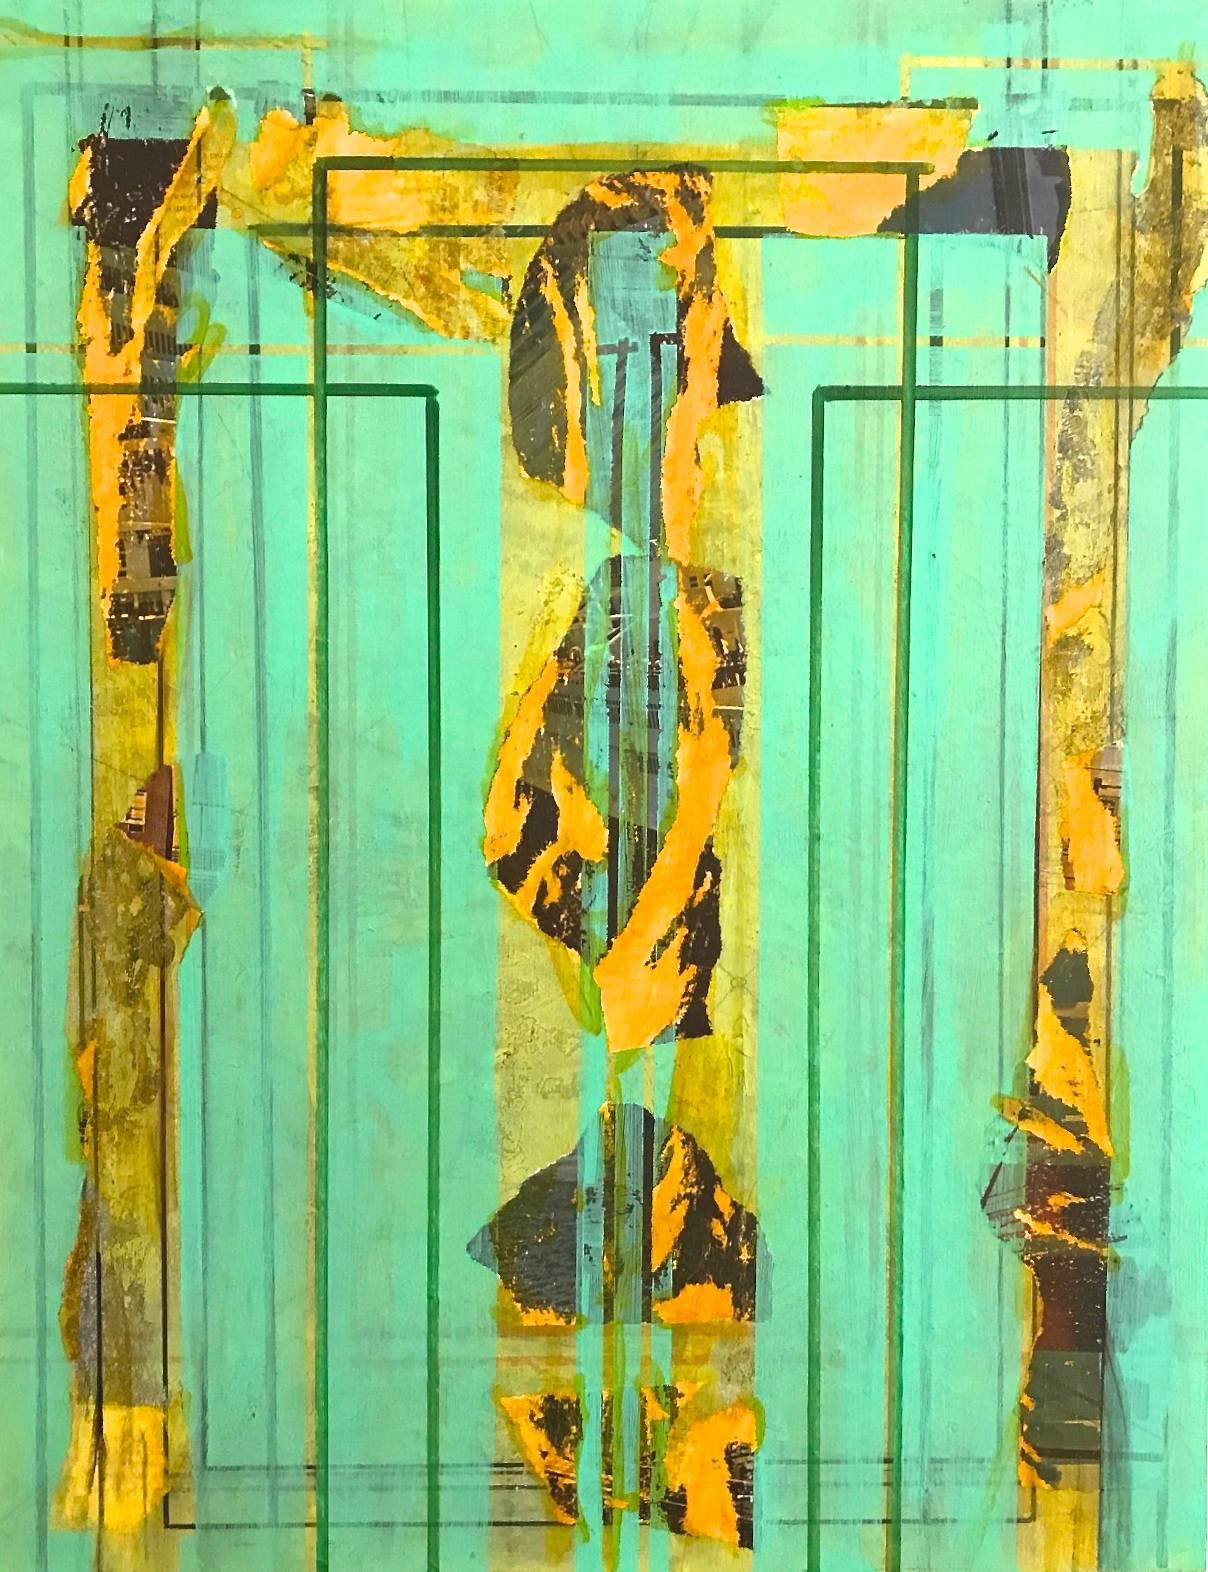 Nancy Berlin Abstract Painting - "Holding On" Abstract Contemporary Modern Blue Yellow Bright Mixed Media